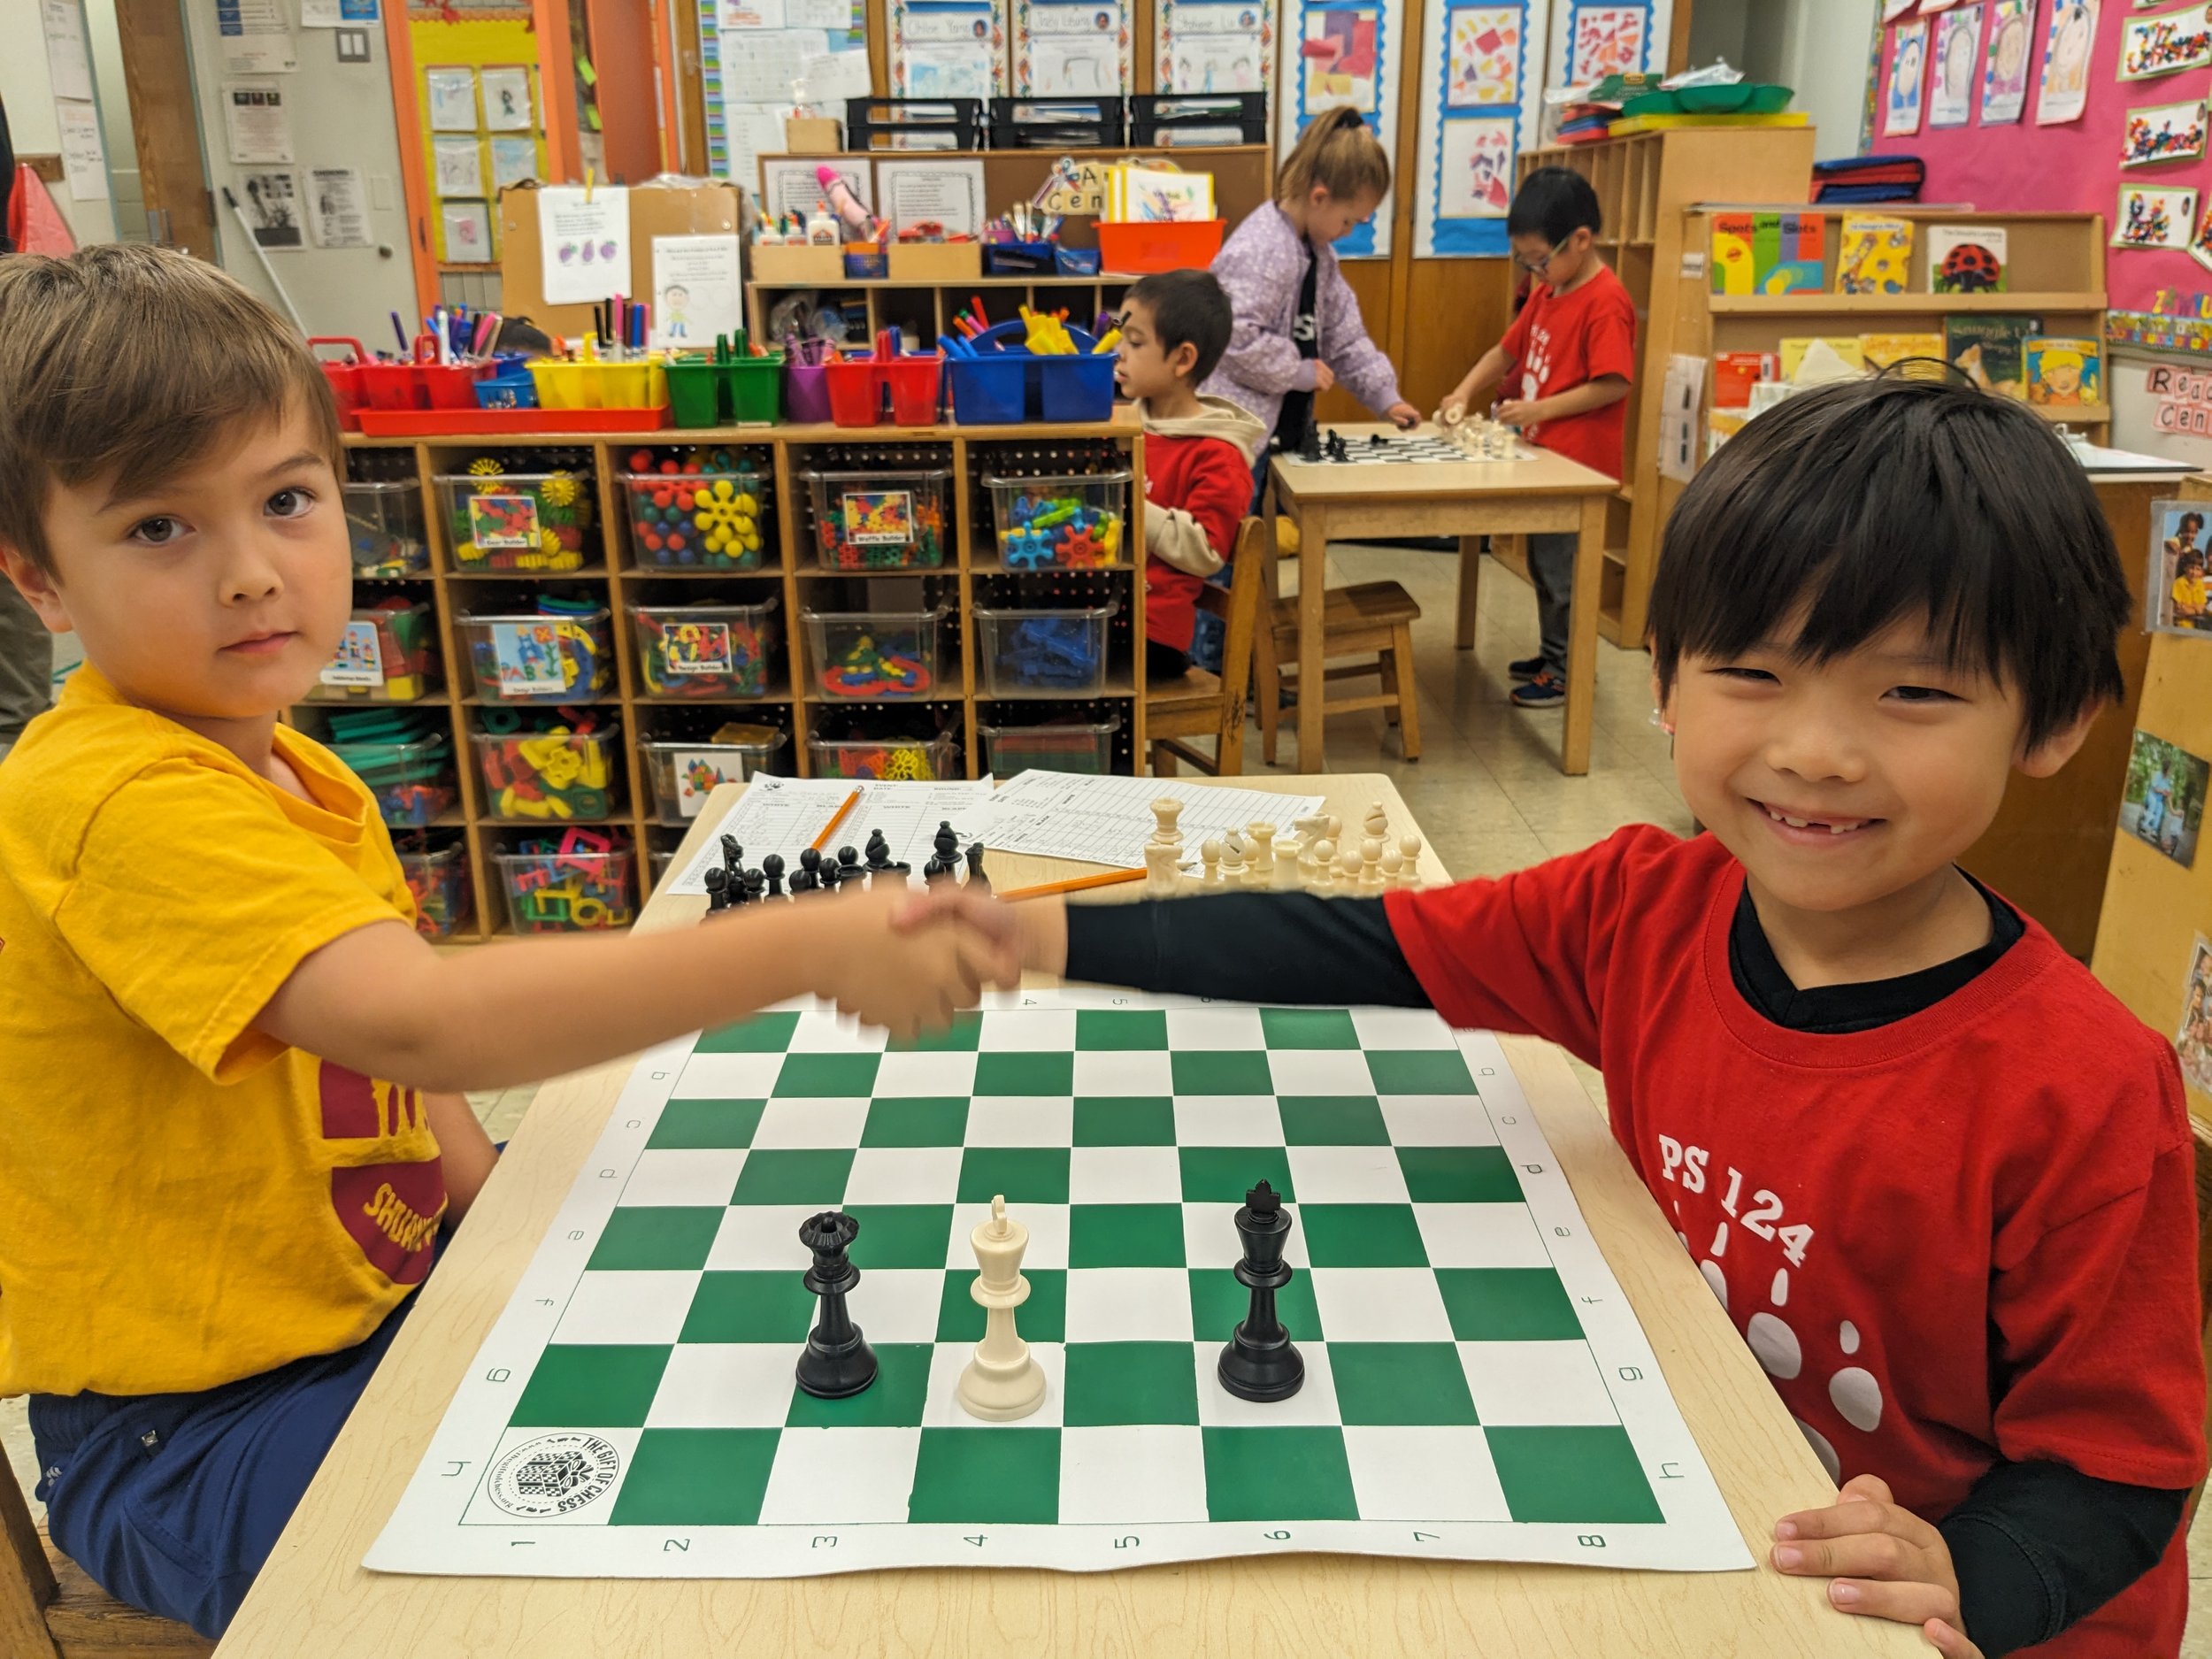 Lion's Paw Chess Academy